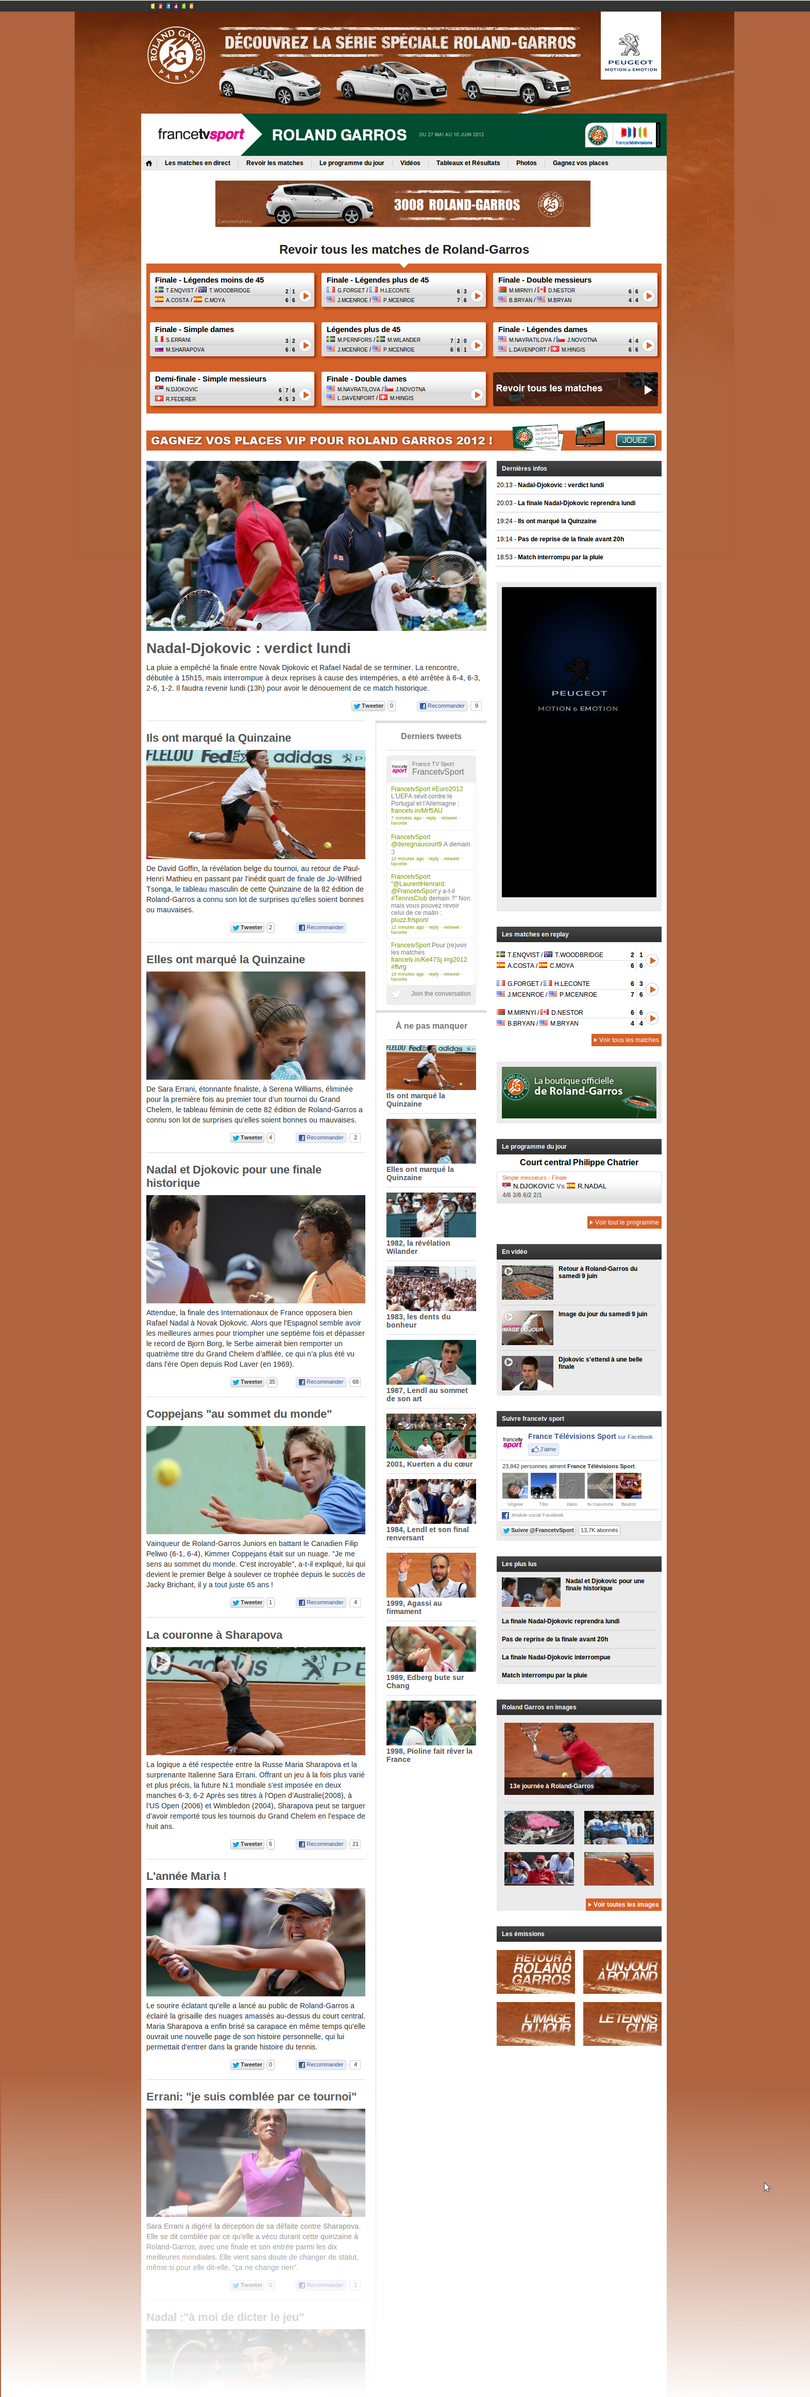 Homepage - View finished matches, switches to live matches in daytime